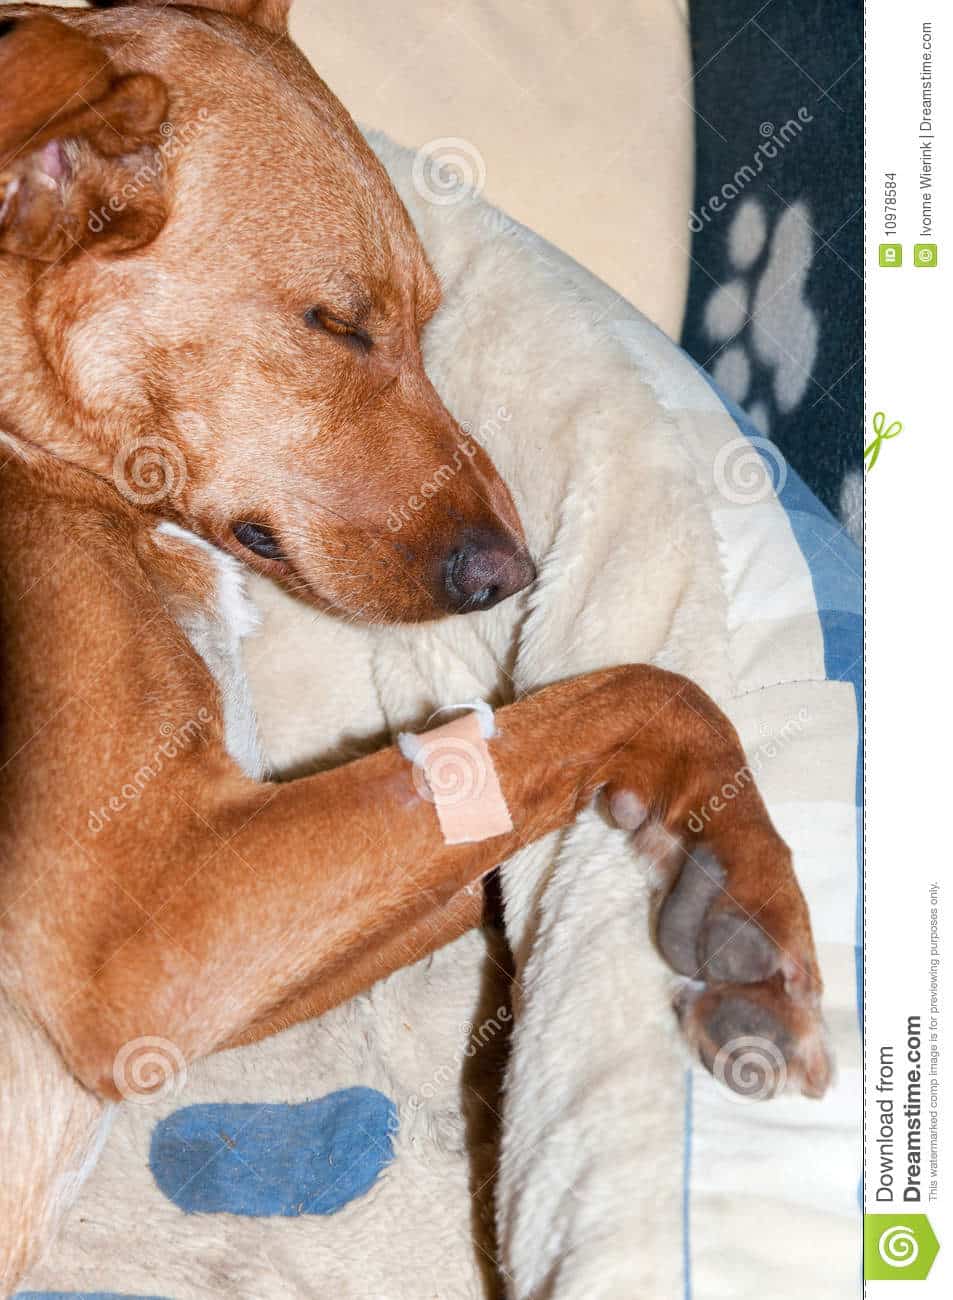 Very sick dog with IV in place